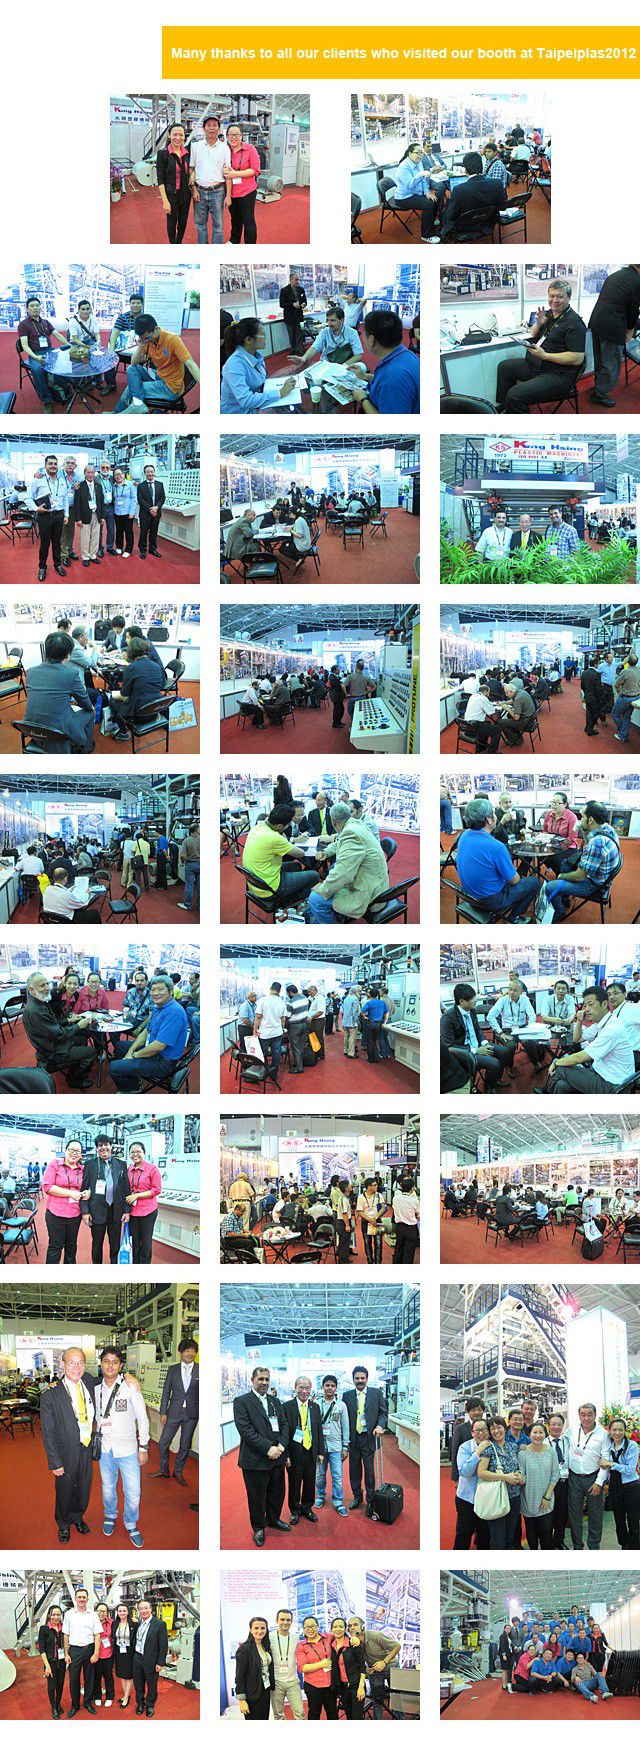 Many thanks to all our clients who visited our booth at Taipeiplas2012